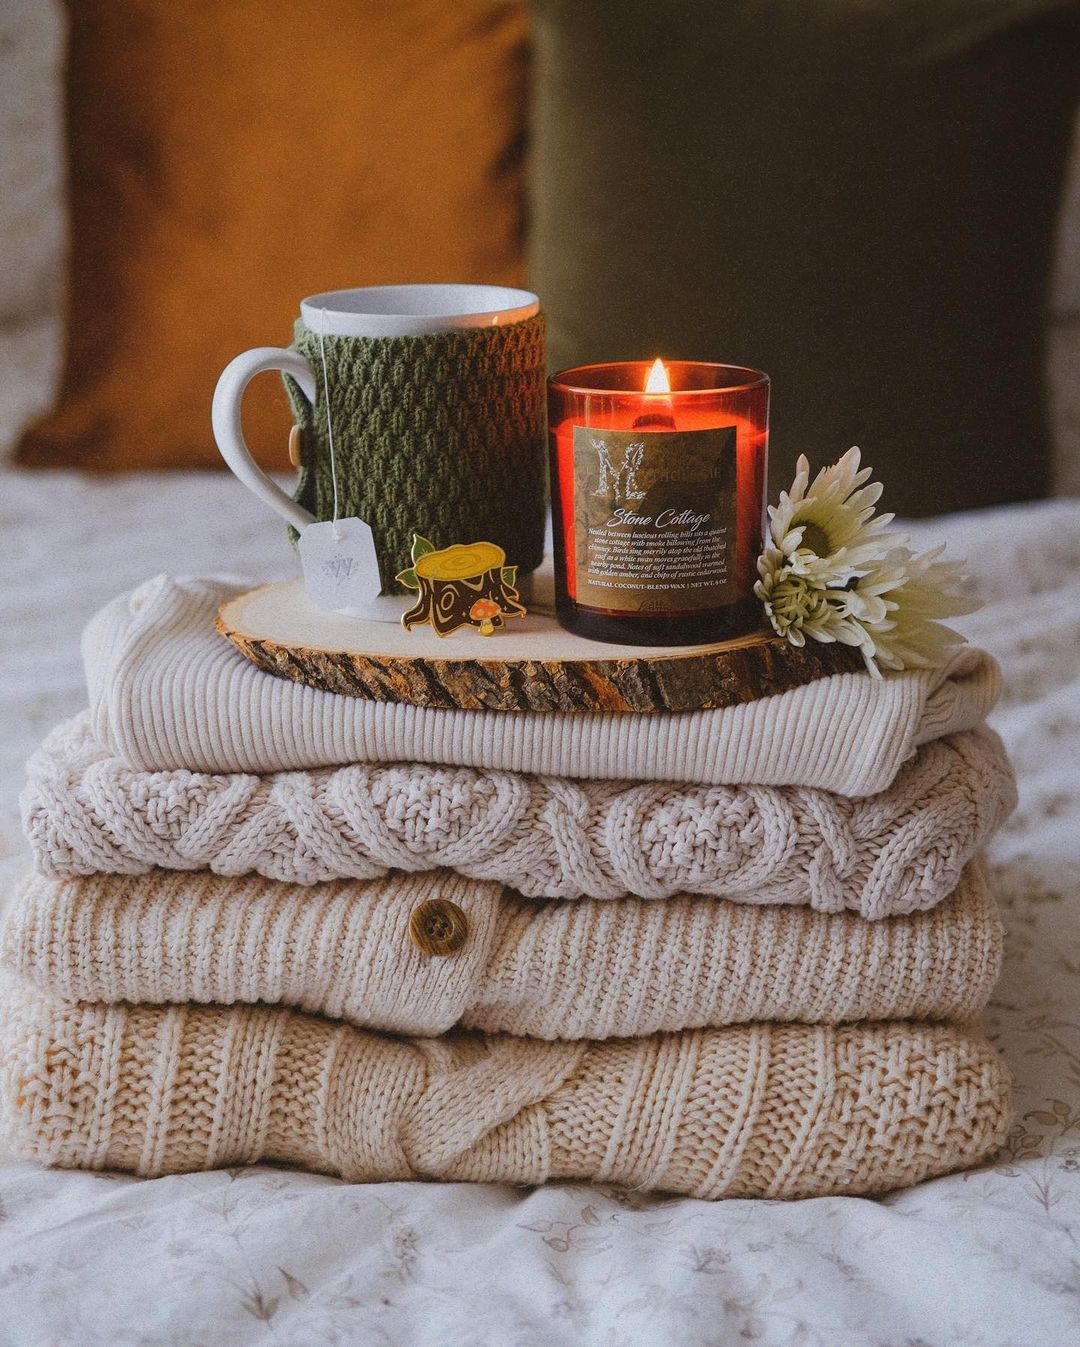 A pile of cozy knit sweaters in creamy off whites folded neatly on a bed with a candle and tea cup on top.